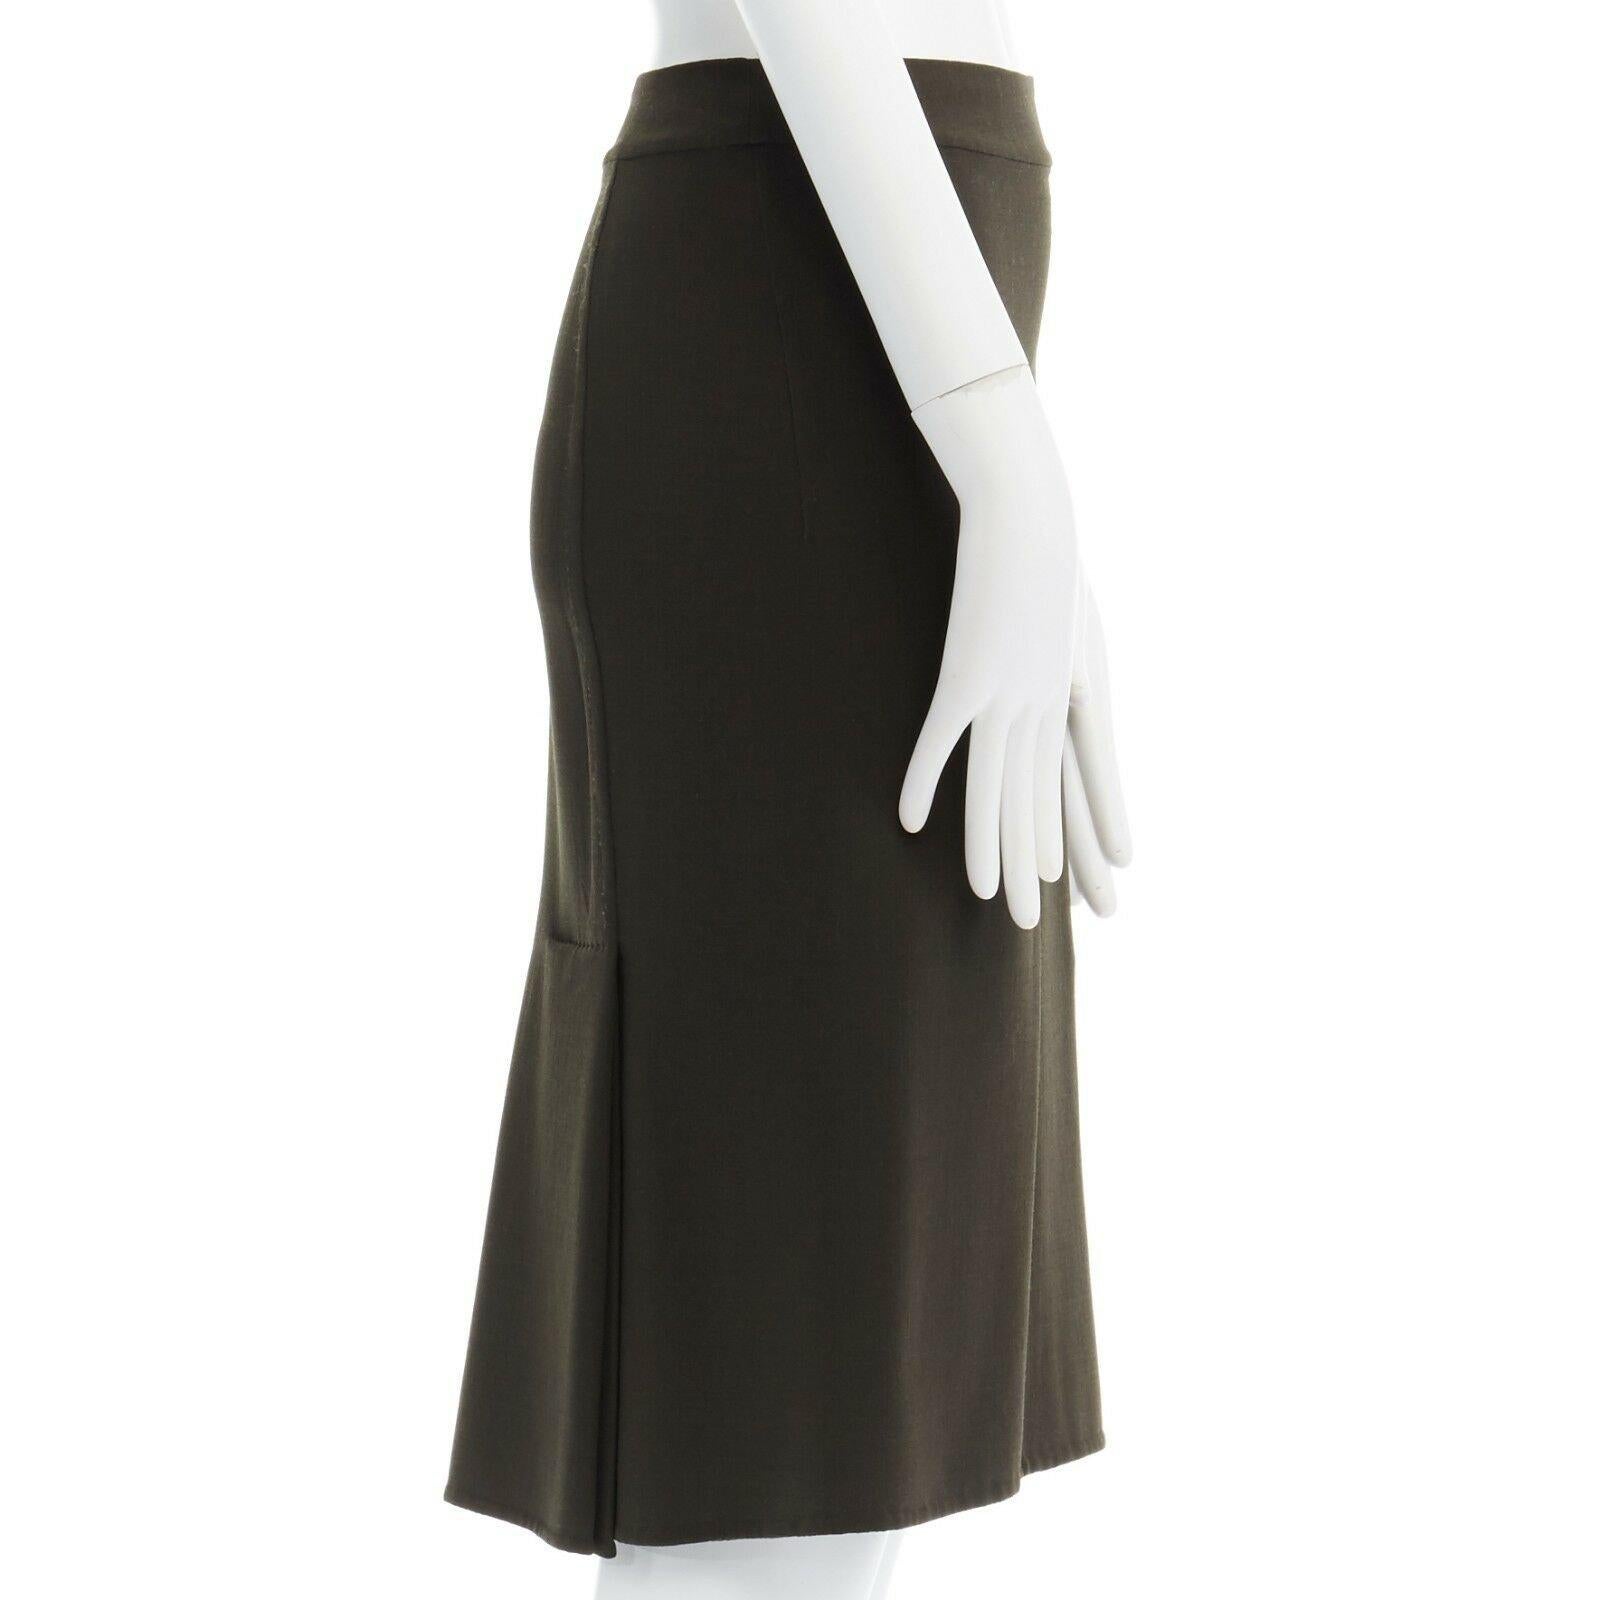 AGNONA BERGDORF GOODMAN green crepe dual pleated back vent A-line skirt IT38 XS 
Reference: LNKO/A00701 
Brand: Agnona 
Material: Silk 
Color: Green 
Pattern: Solid 
Closure: Zip 
Extra Detail: Dark green. Flat waistband. Concealed zip side closure.